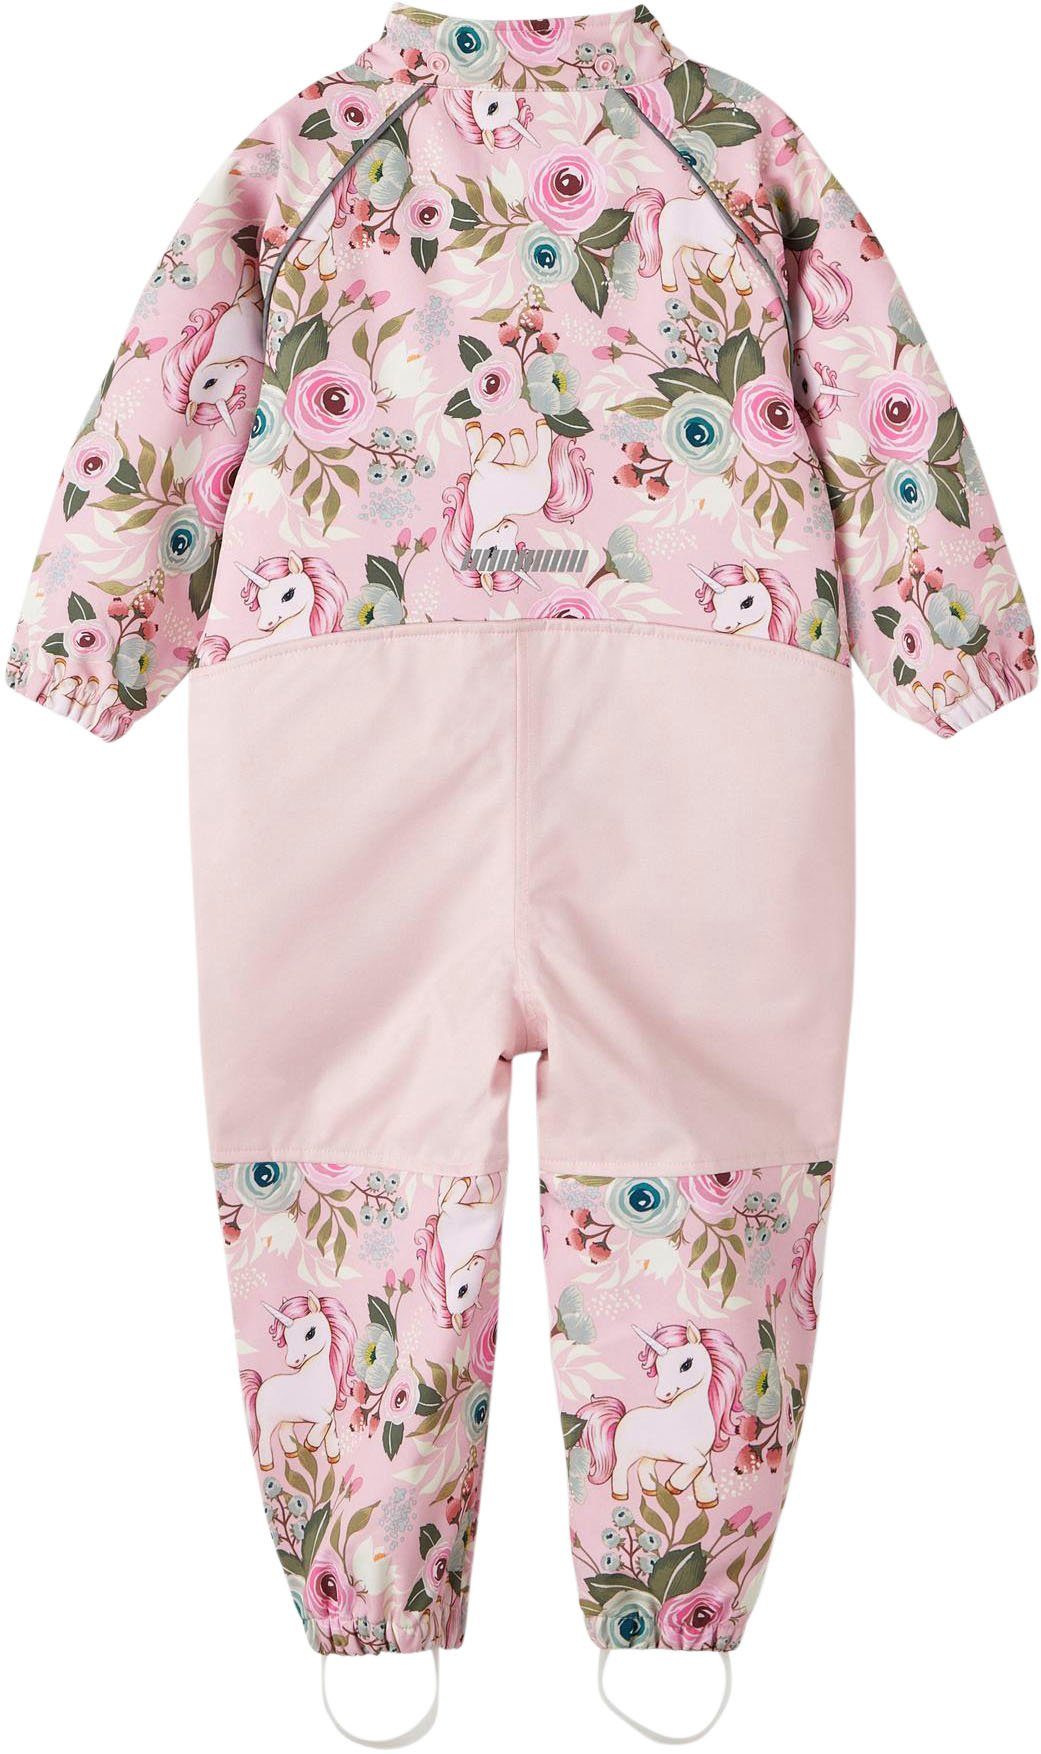 NOOS Name FLORAL 2FO nectar Softshelloverall SUIT It NMFALFA pink